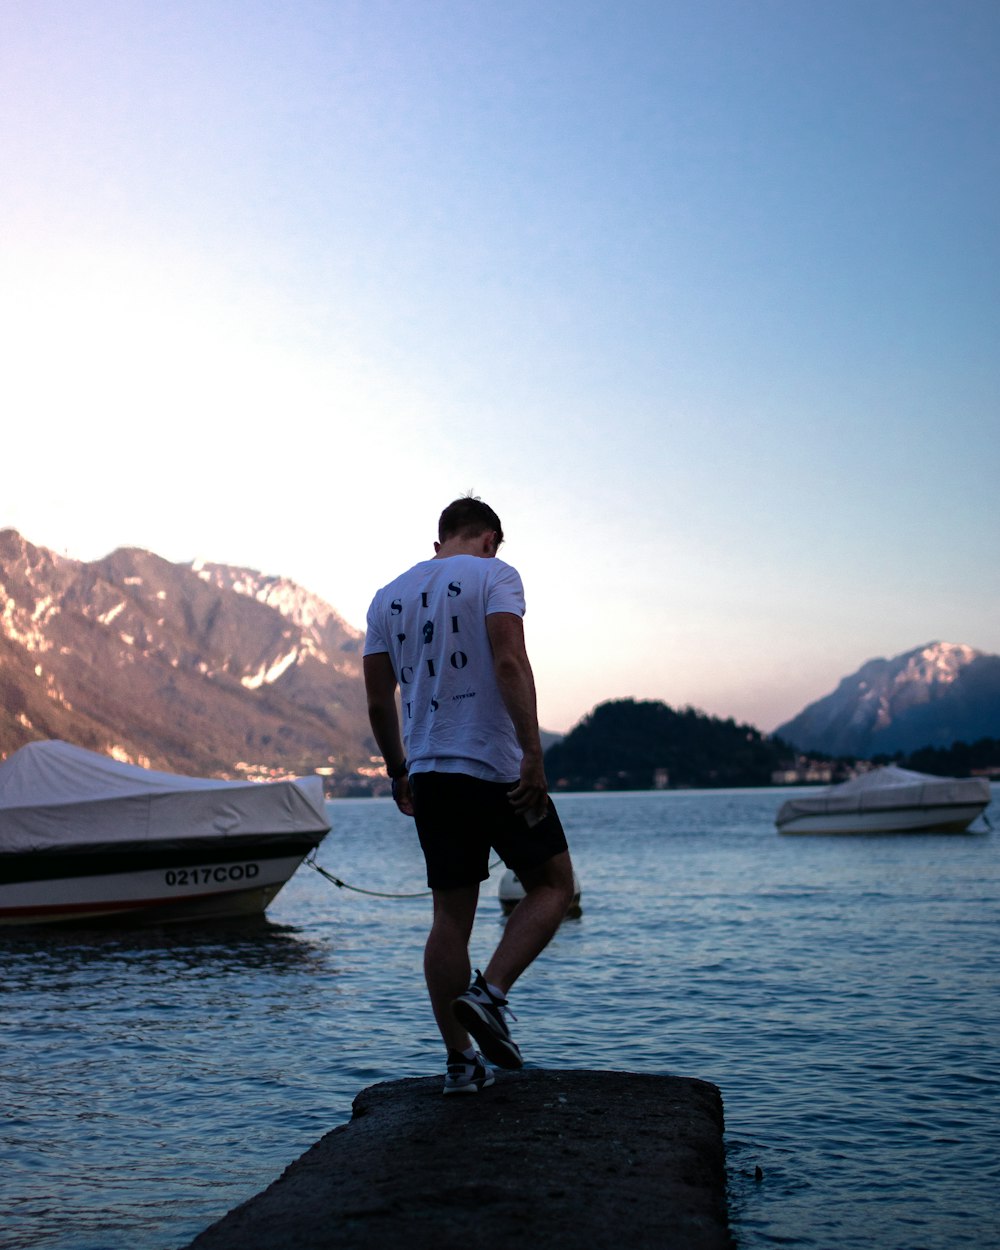 man in white shirt and black shorts standing on rock near body of water during daytime